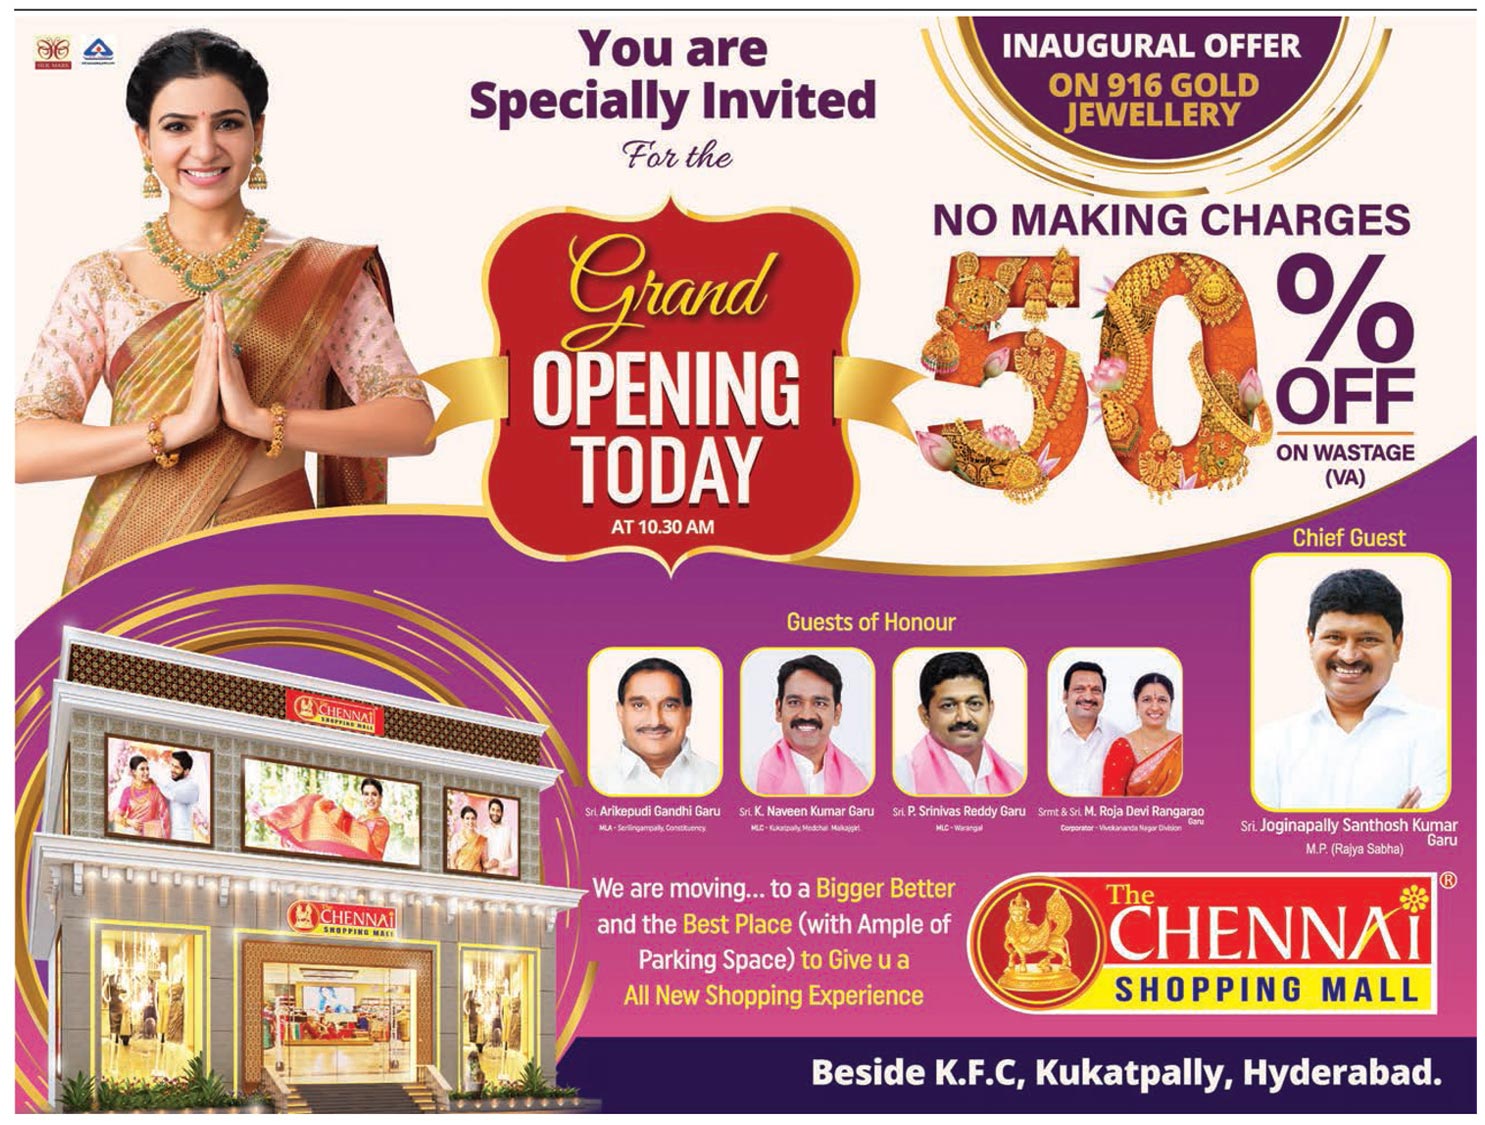 the-chennai-shopping-mall-grand-opening-today-ad-deccan-chroncile-hyderabad-19-06-2021